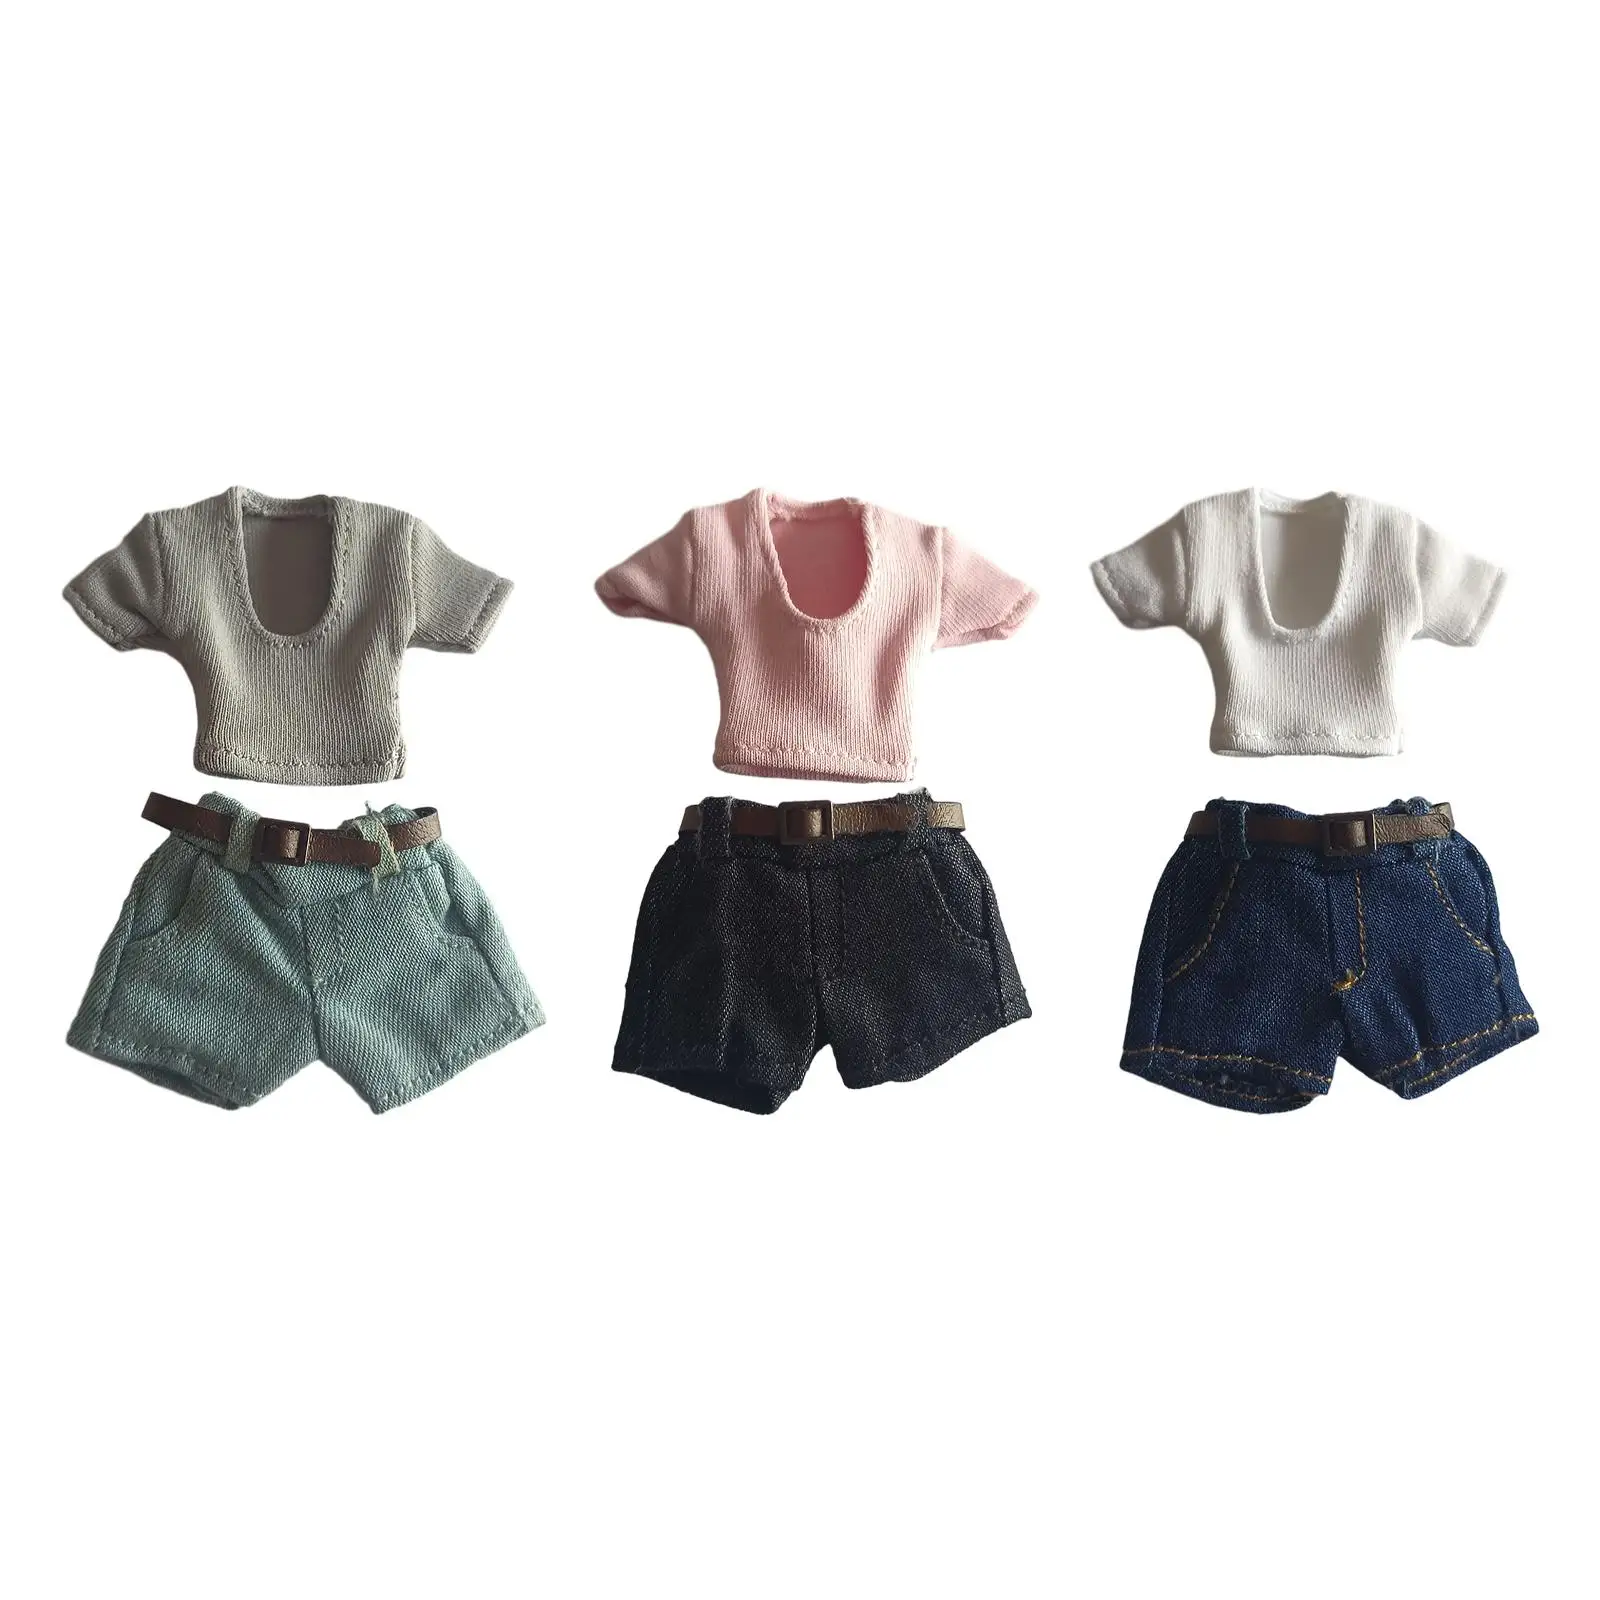 

1/12TH Female Figure Clothing with Belt Miniature Costume Stylish Kids Adults Gifts T Shirt Shorts Set for 6'' inch Doll Figures